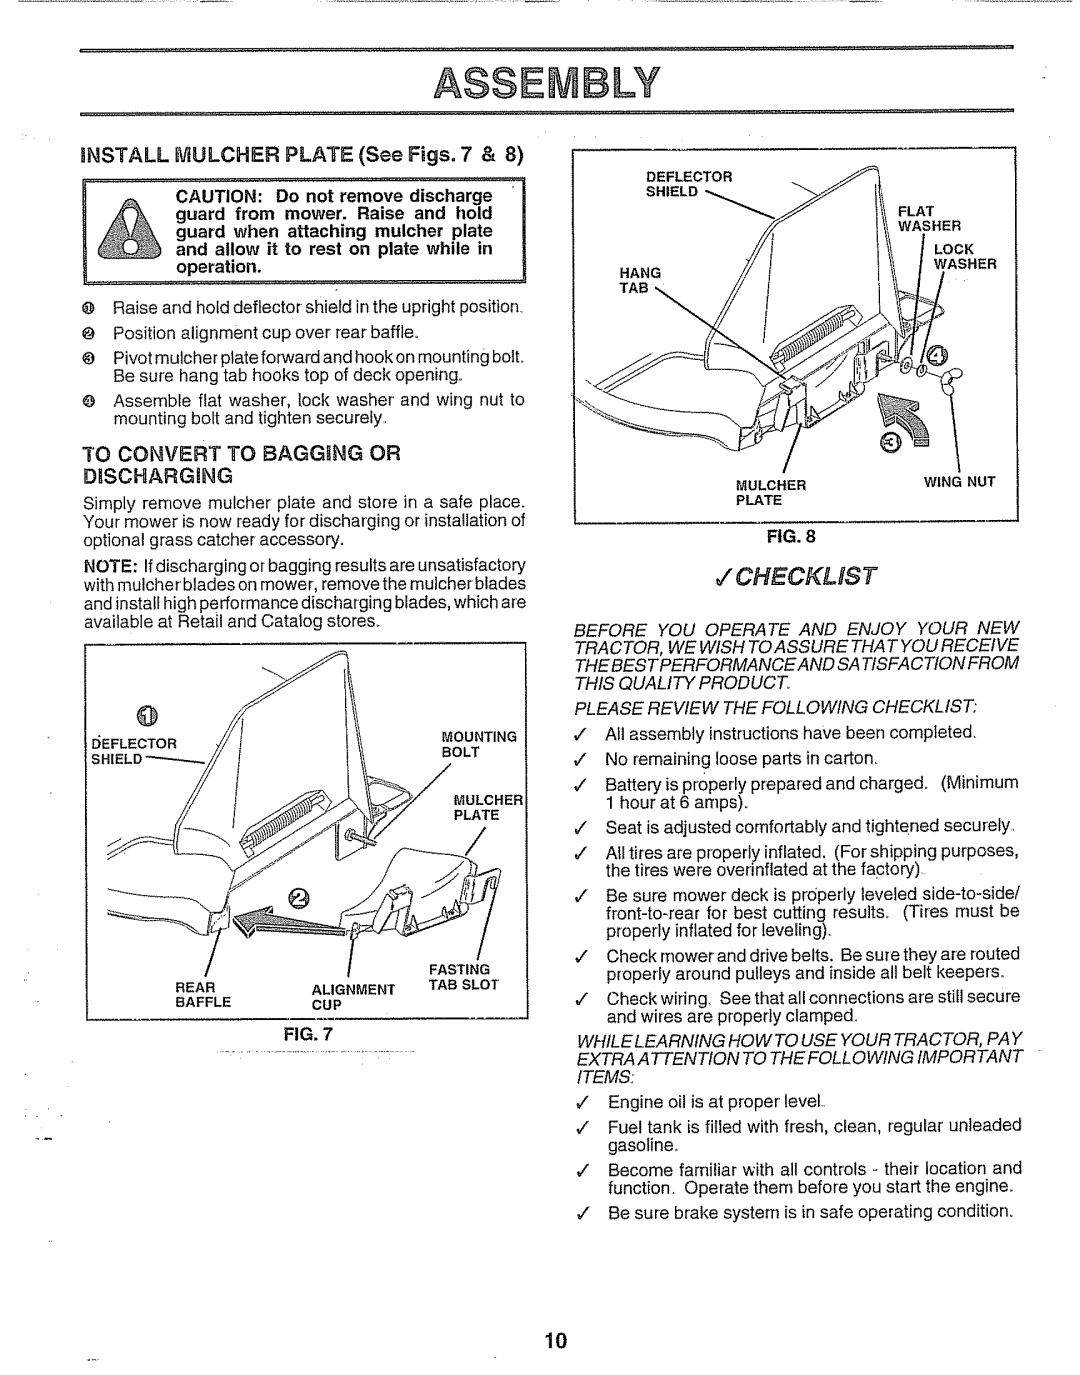 Craftsman 917.25693 owner manual Assem Ly, Checklist, iNSTALL MULCHER PLATE See Figs. 7, CONVERT 30 BAGGING OF, Dischargrng 